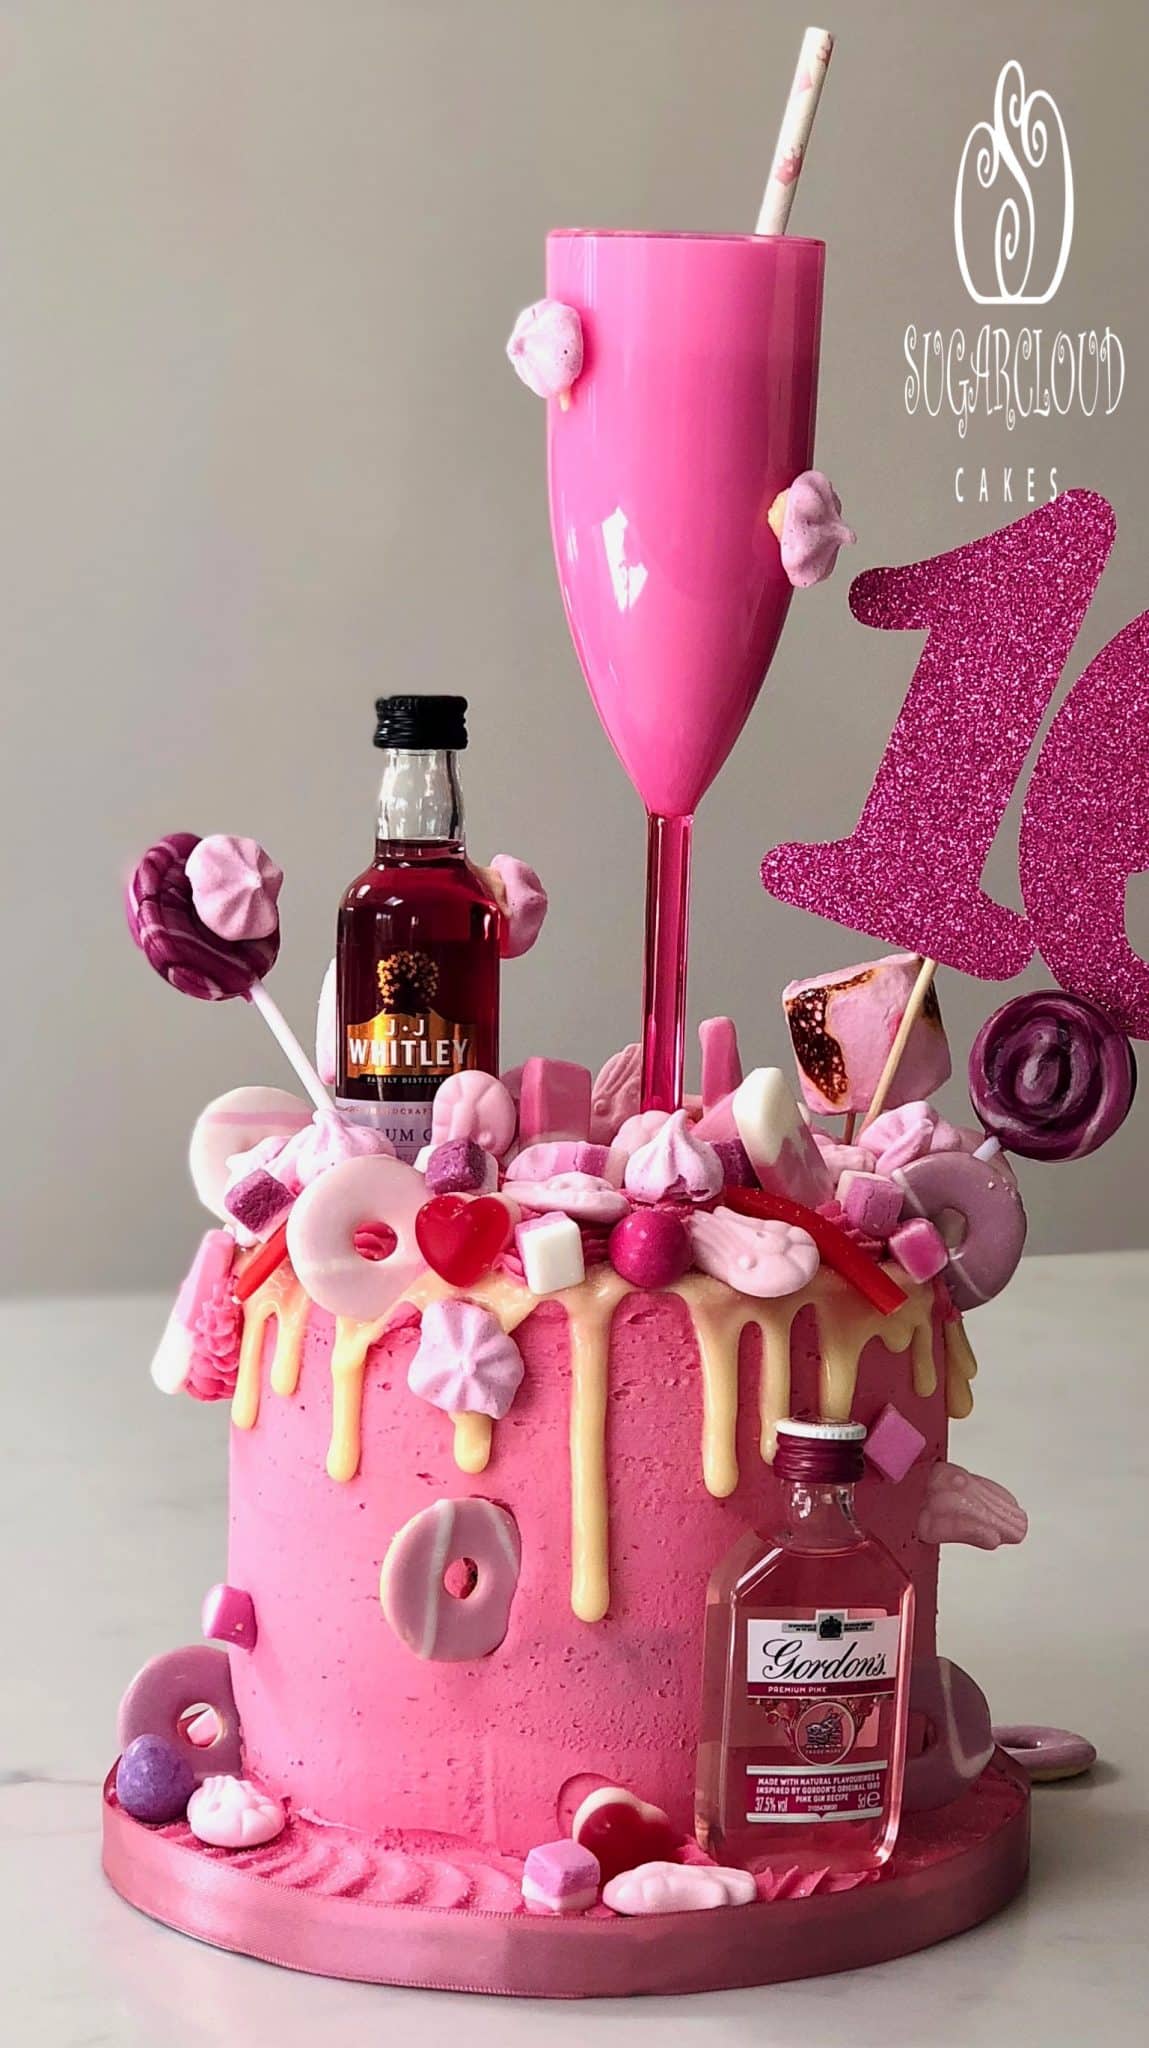 A Pink Themed Birthday Cake